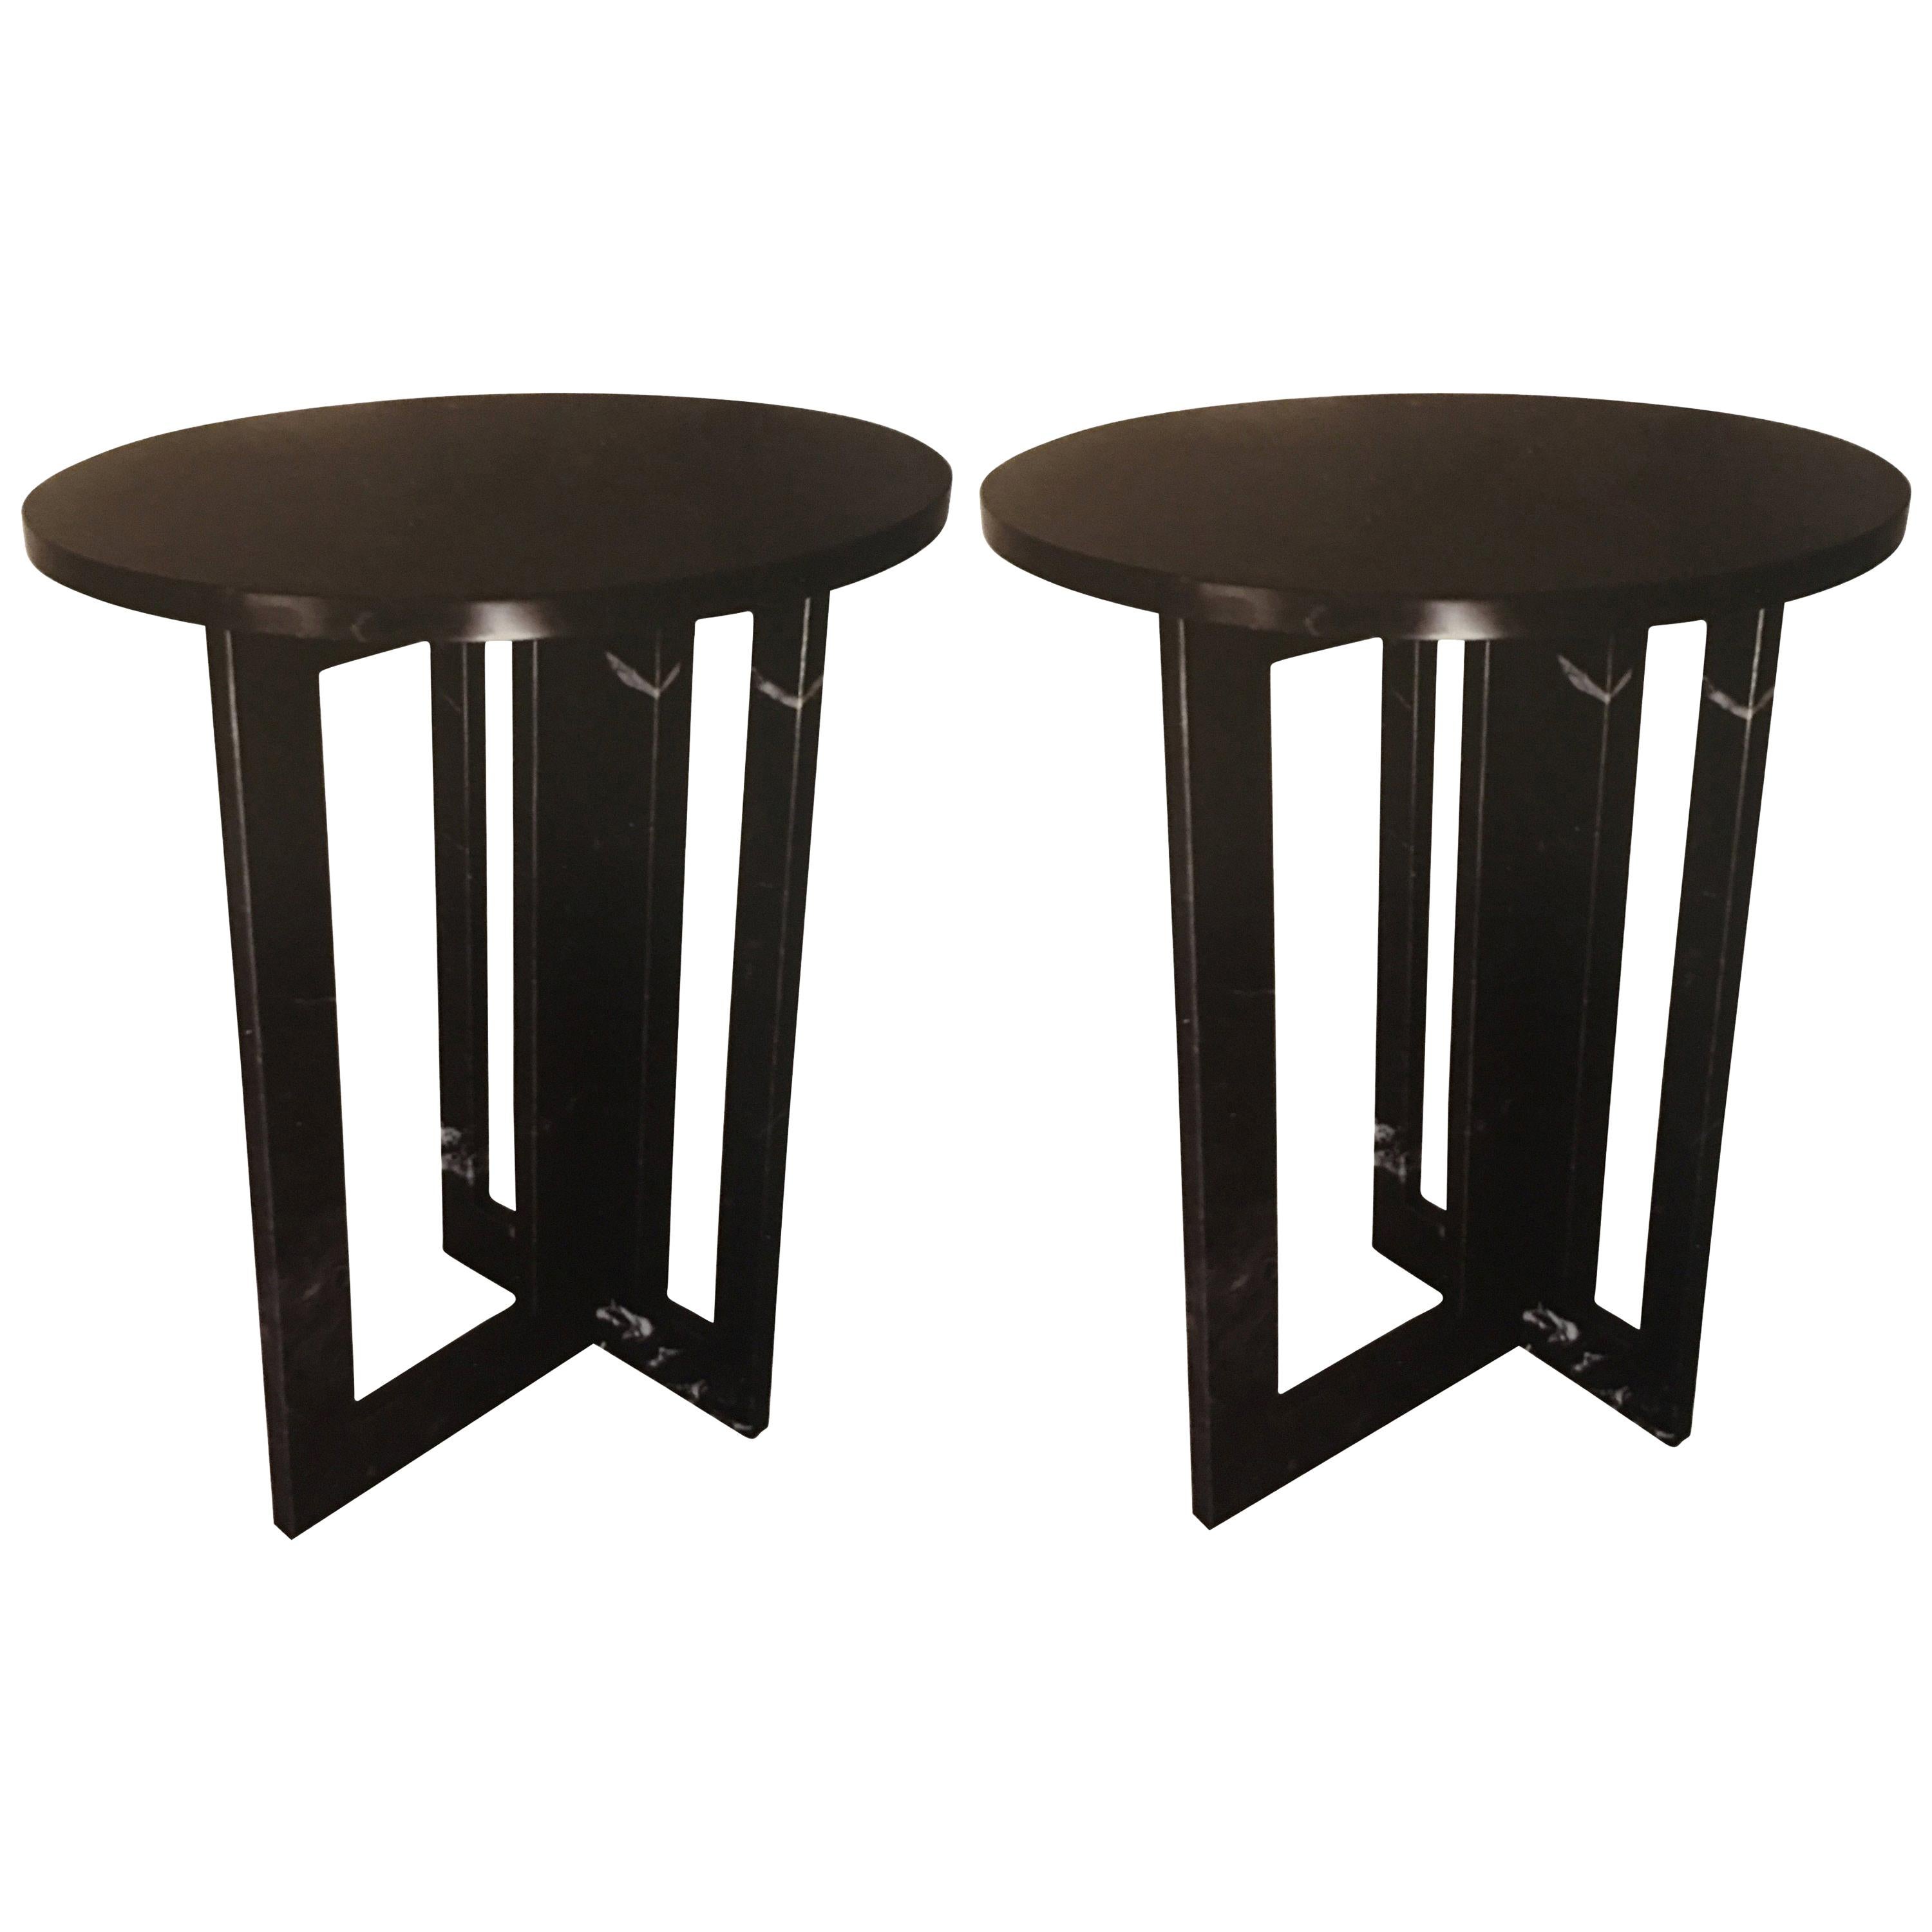 Pair of Italian Modern Black Marble Side Tables by Massimo Mangiardi For Sale